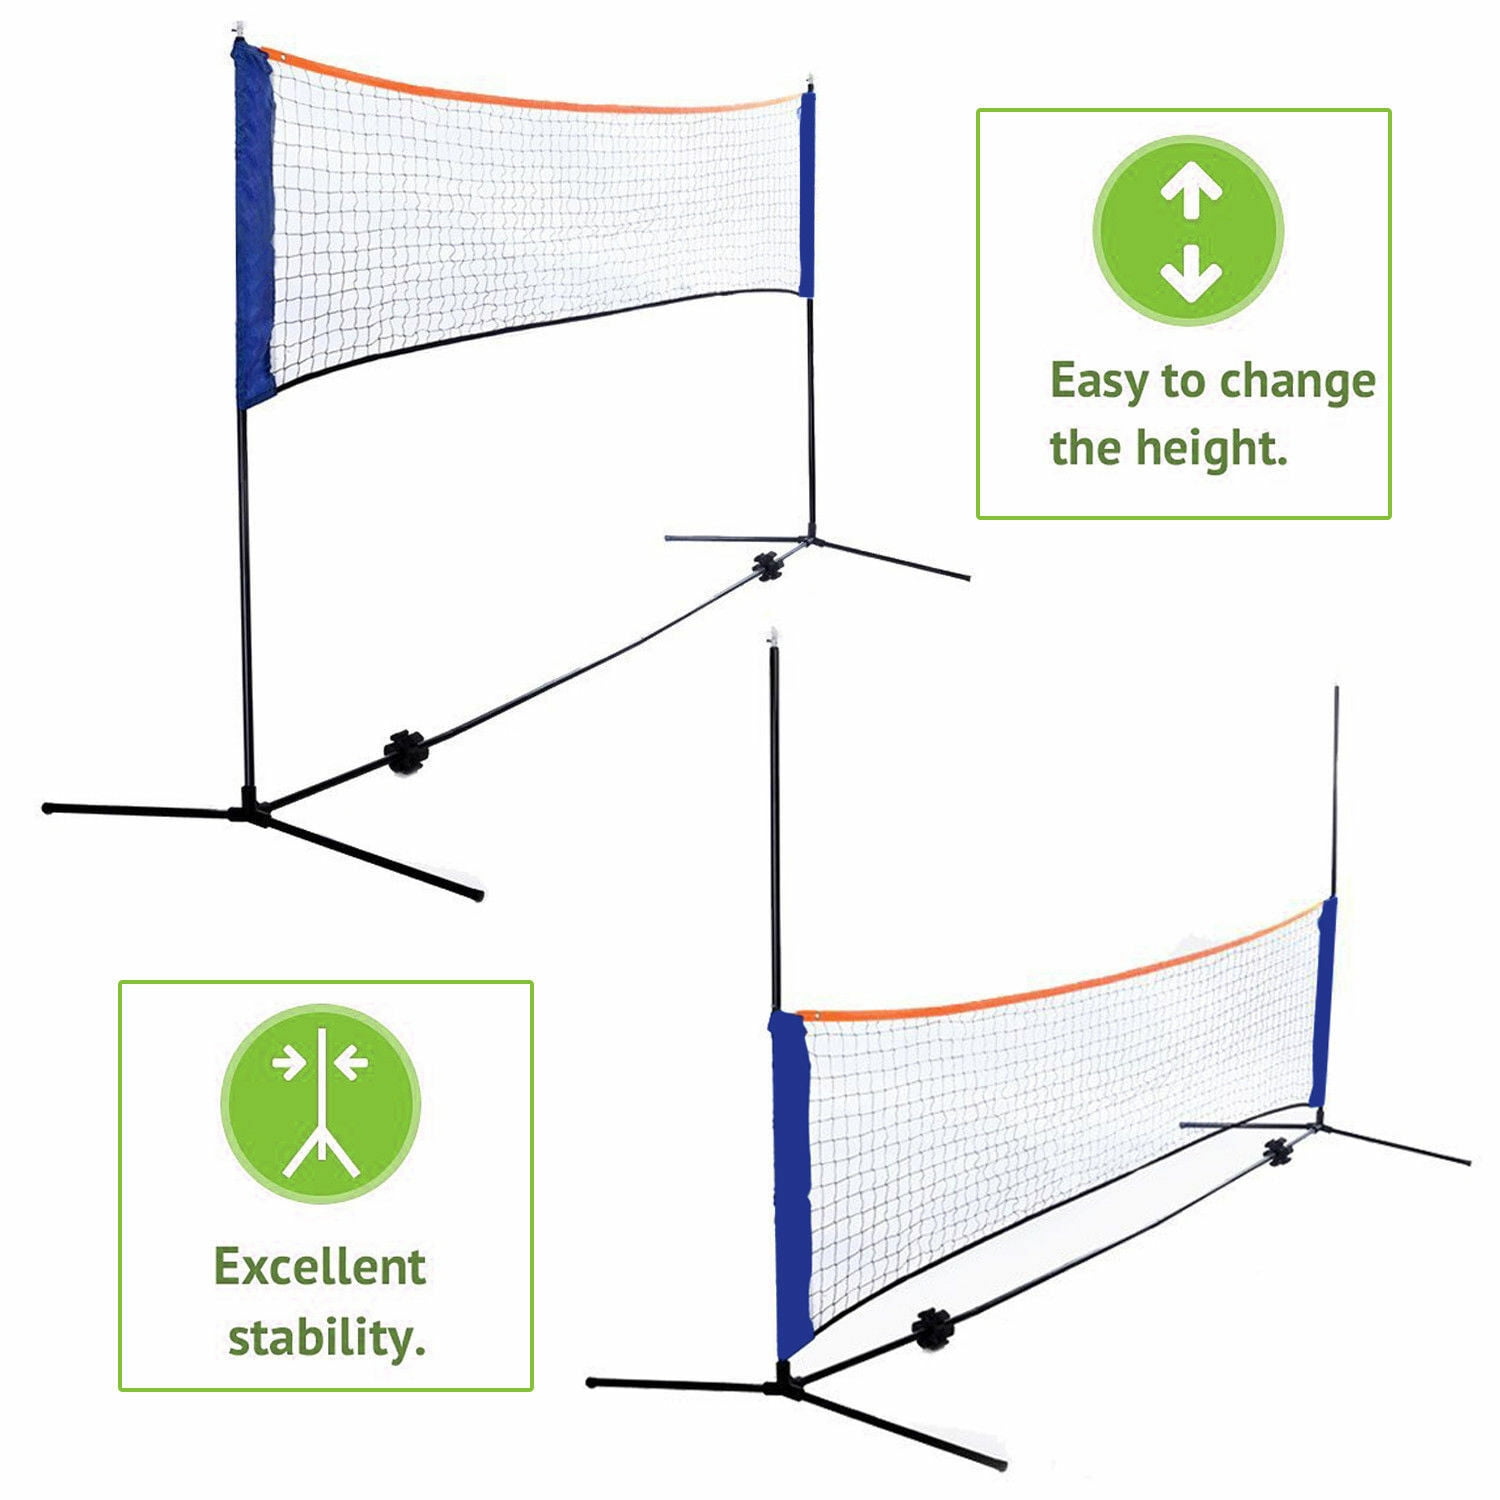 Volleyball Tennis Net Set with Stand Frame Carry Bag 10 Feet Portable Badminton